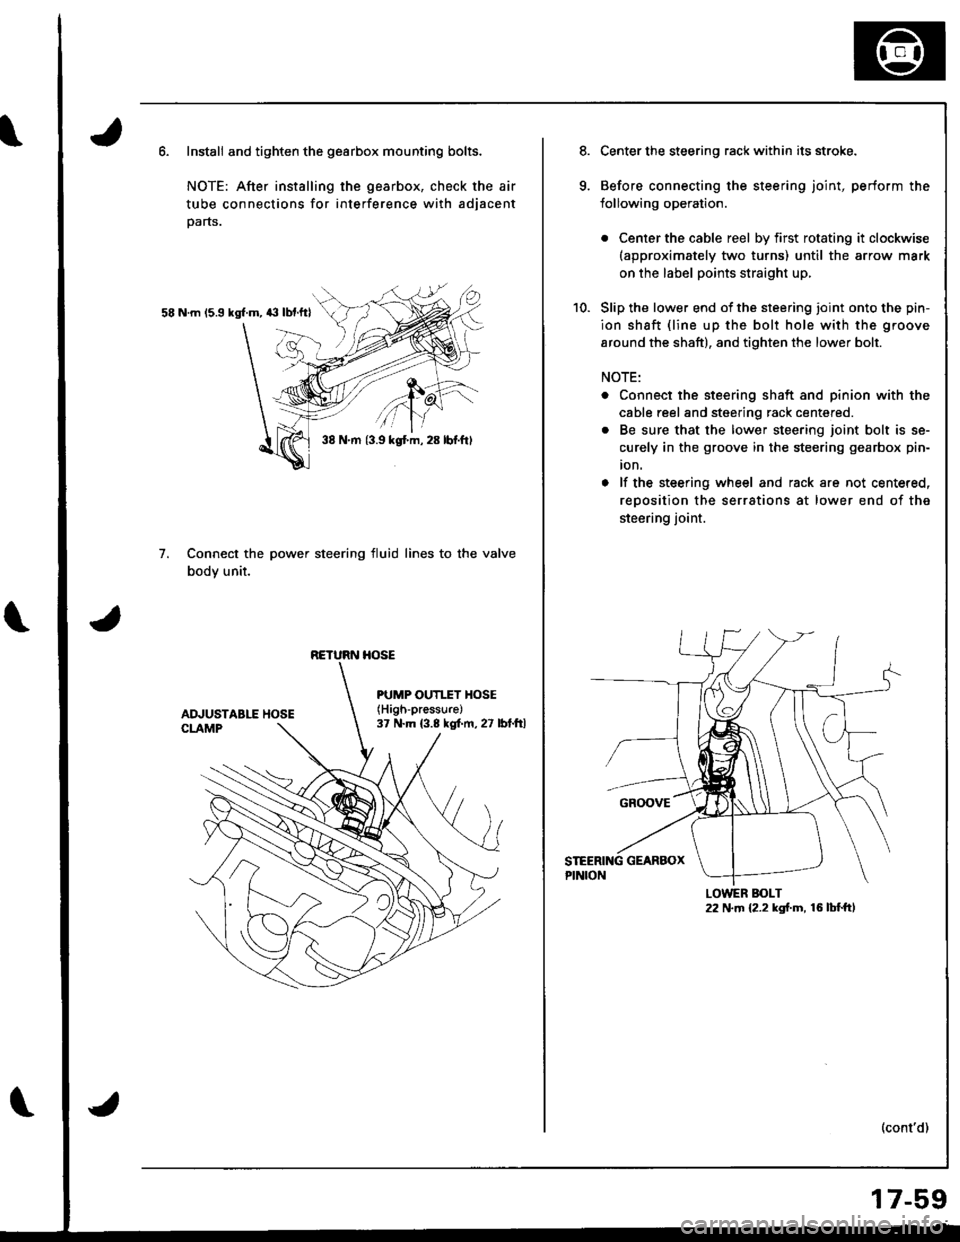 HONDA INTEGRA 1998 4.G Workshop Manual Install and tighten the gearbox mounting bolts.
NOTE: After installing the gearbox, check the air
tube connections for interference with adjacent
parts.
58 N.m 15.9 kgl.m, 43 lbf.ftl
Connect the power